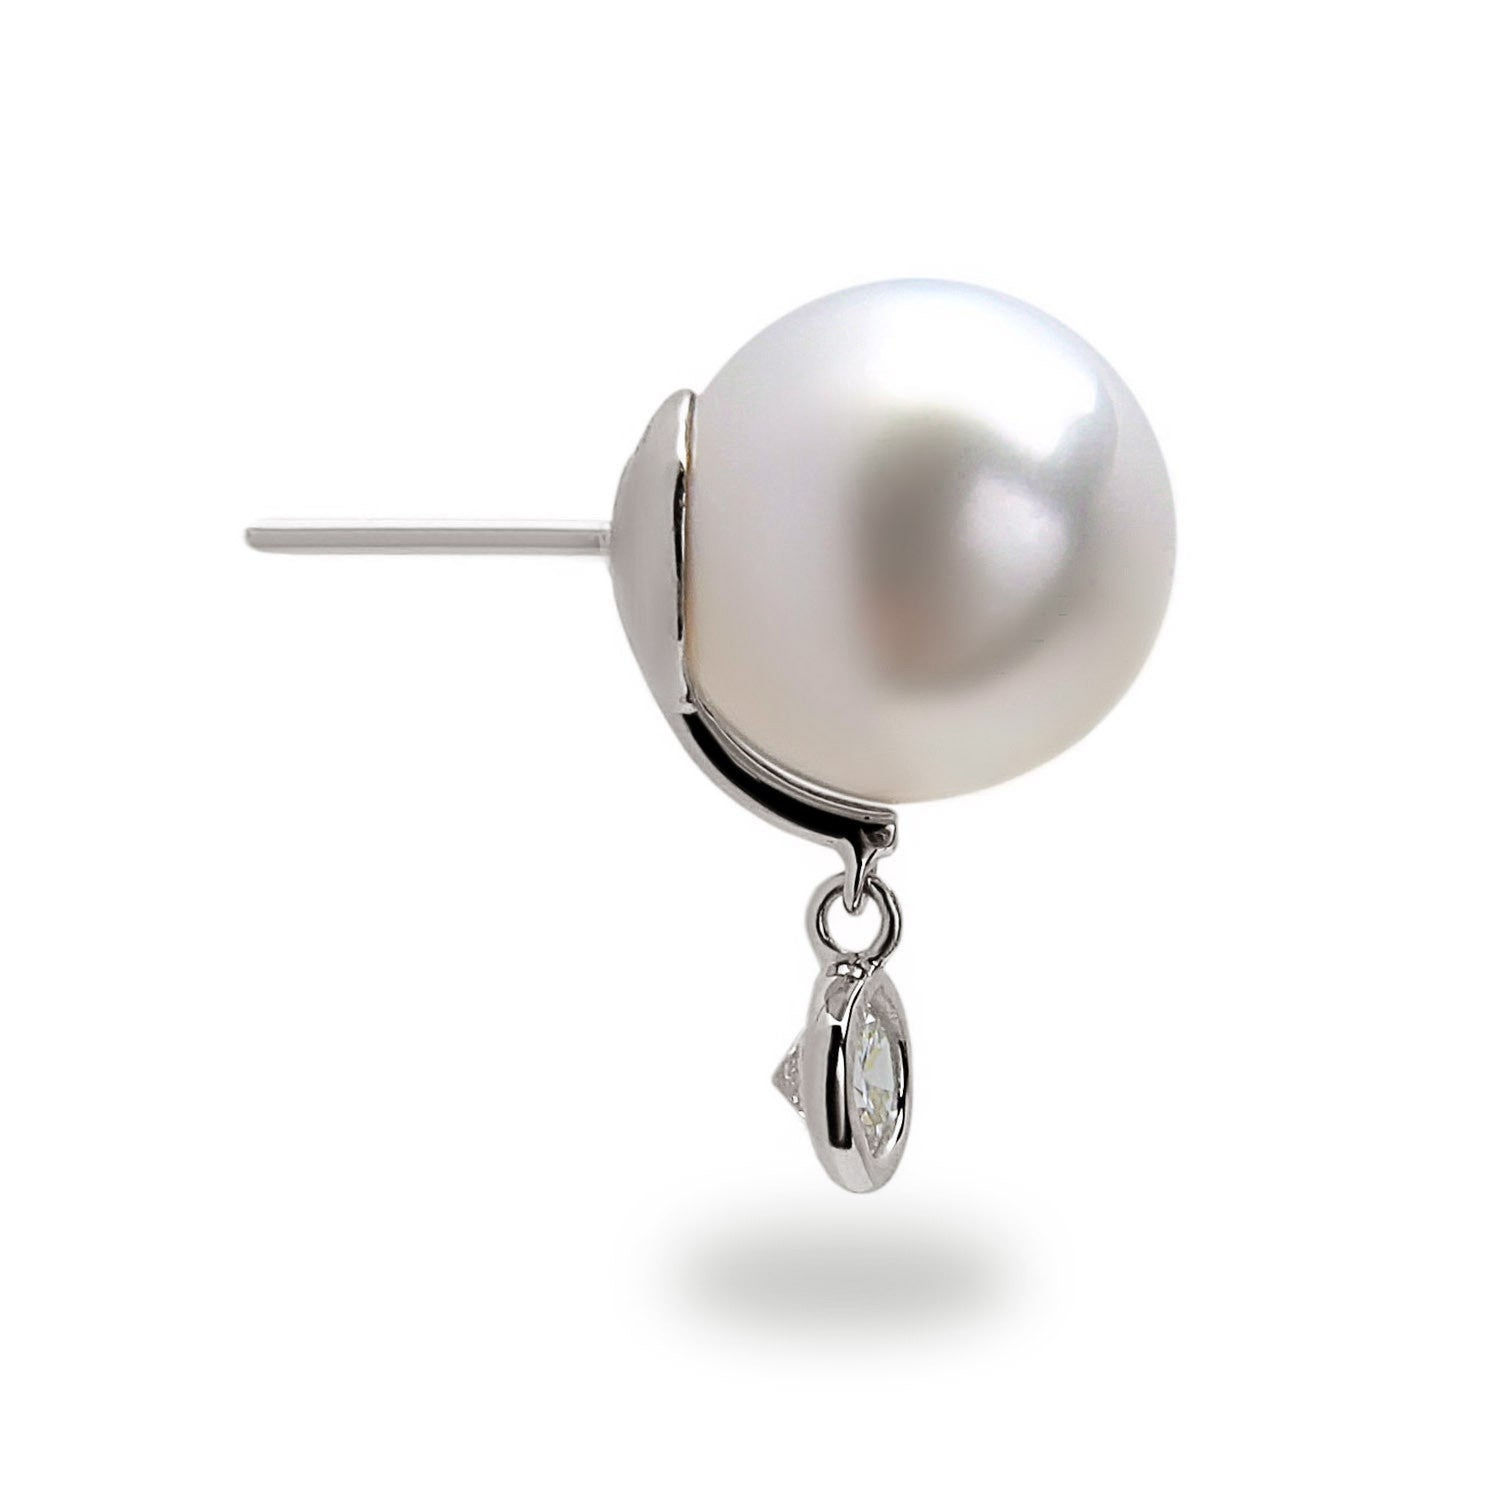 Dancing Diamond  Collection 9x10mm White South Sea Pearl and Bezel Diamond Earrings